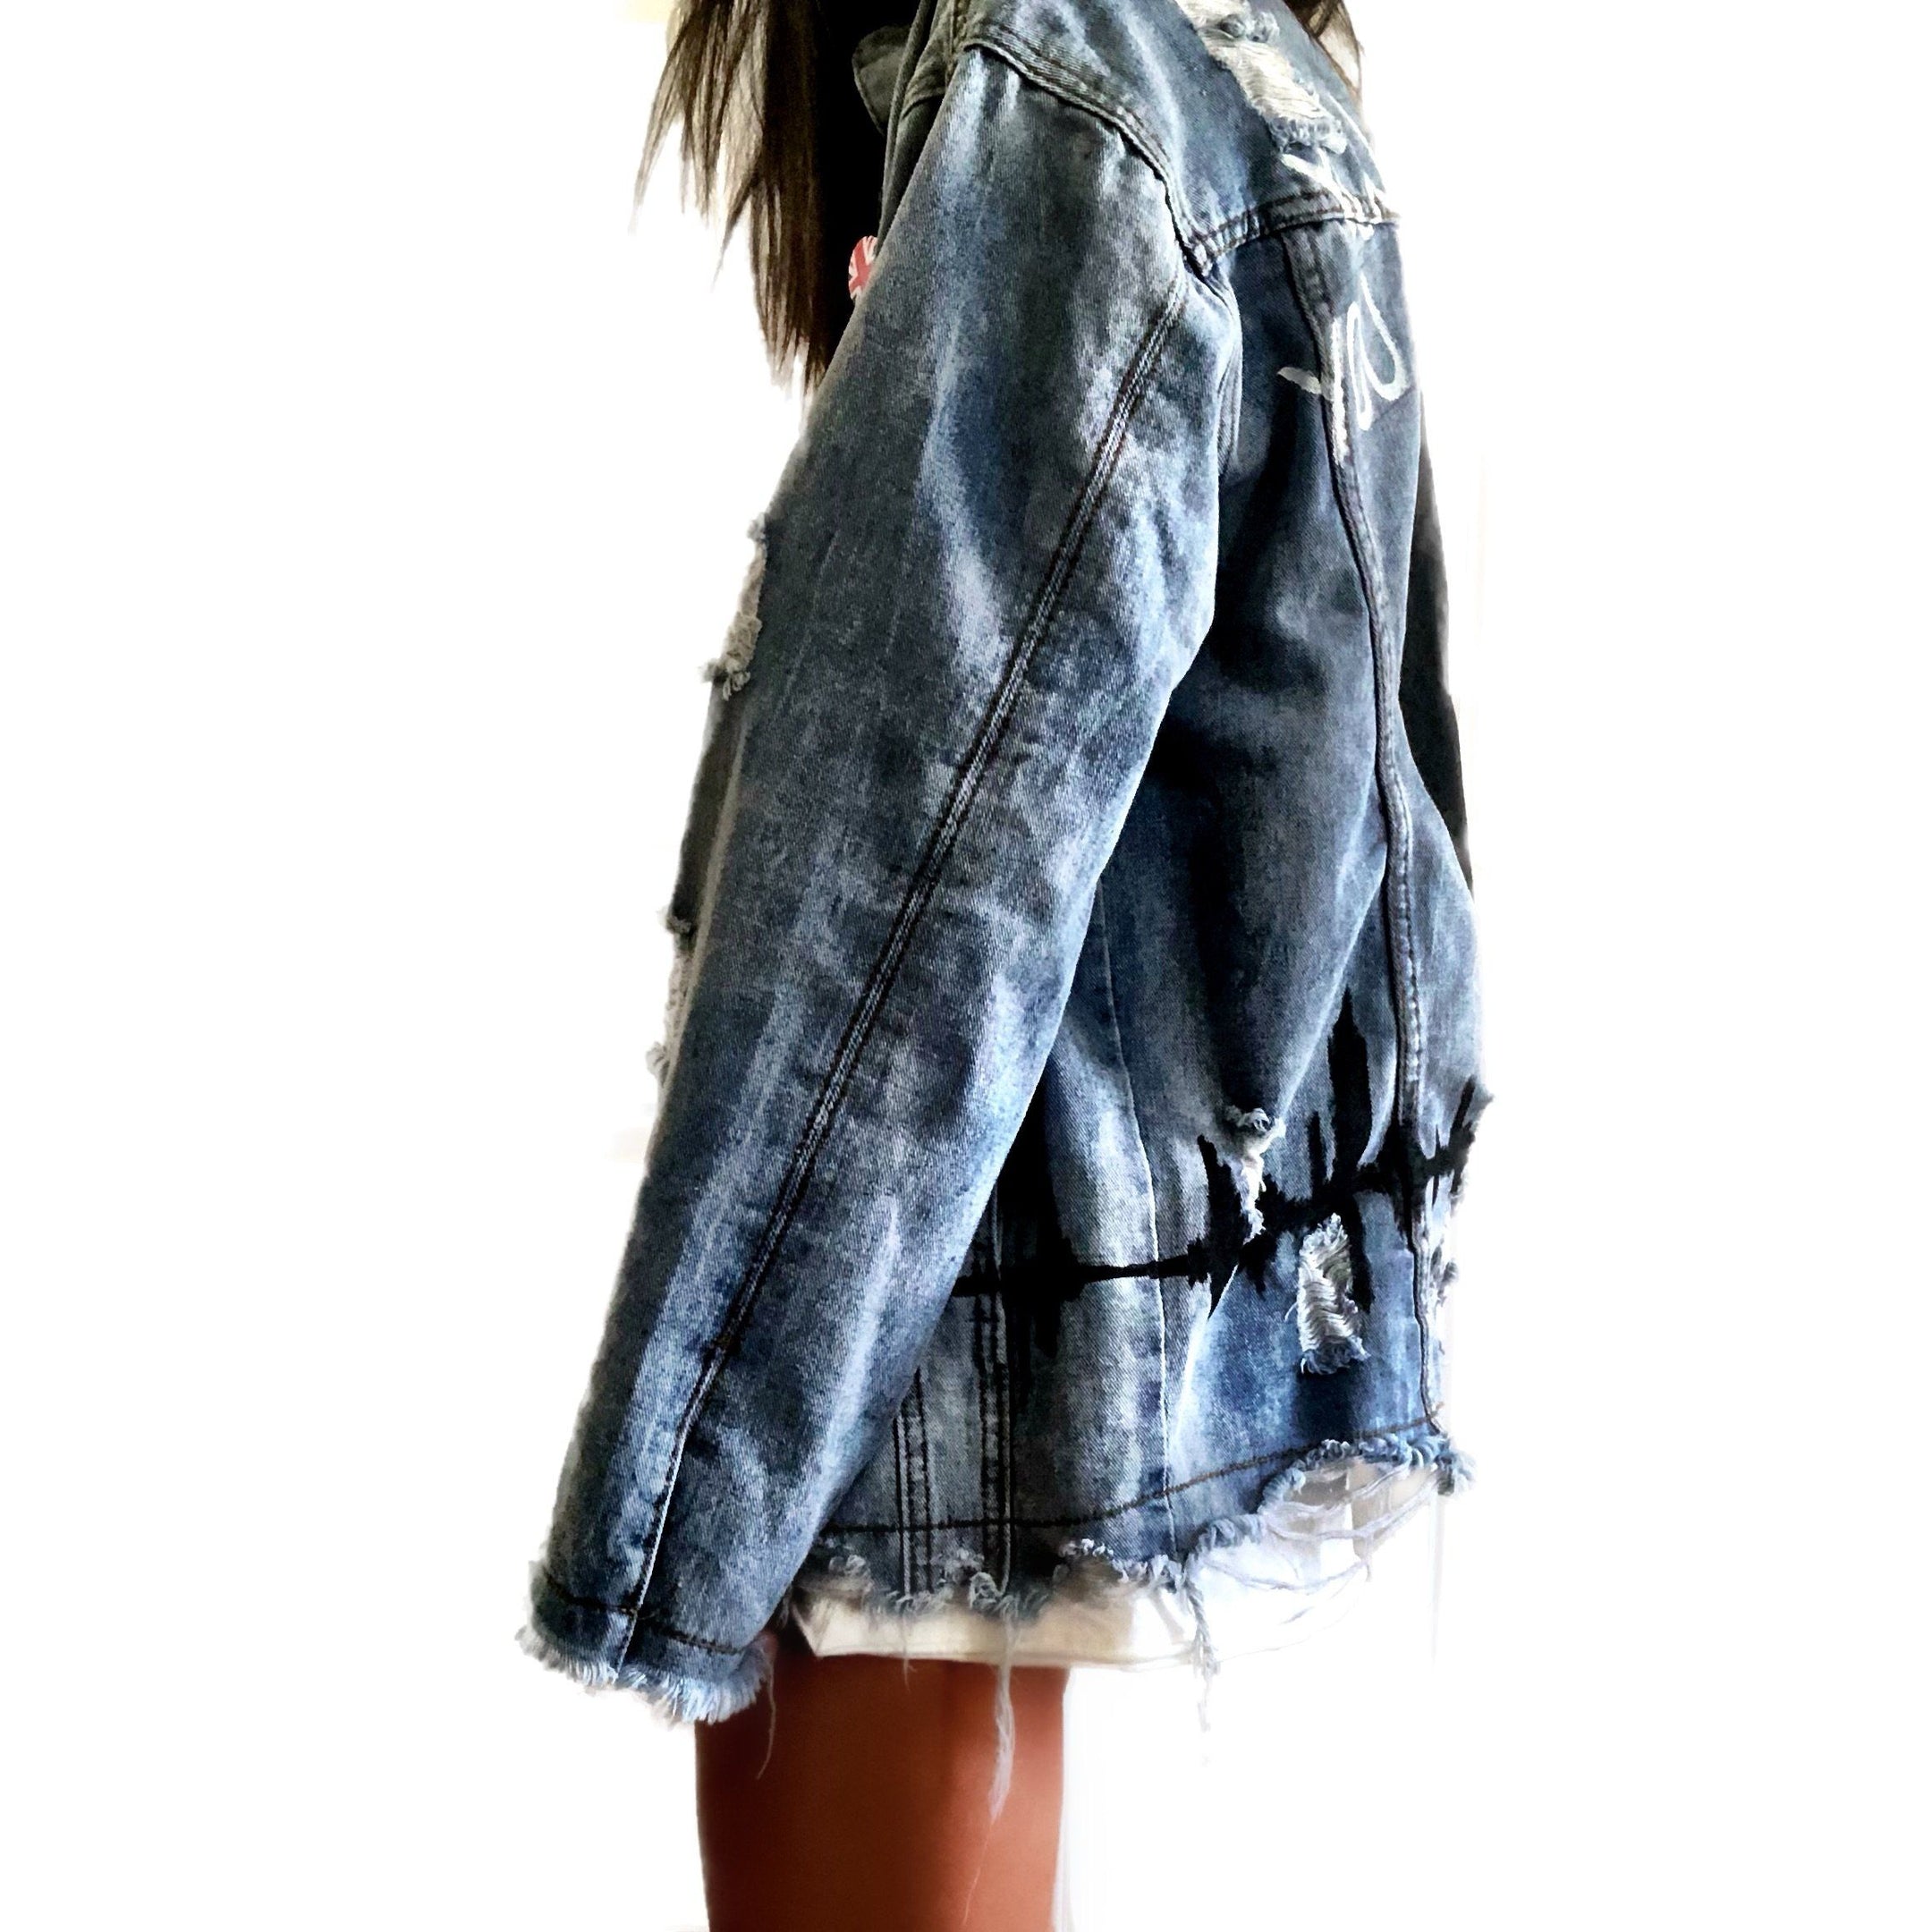 Buy WITH THE BAND' DENIM JACKET by Wren + Glory